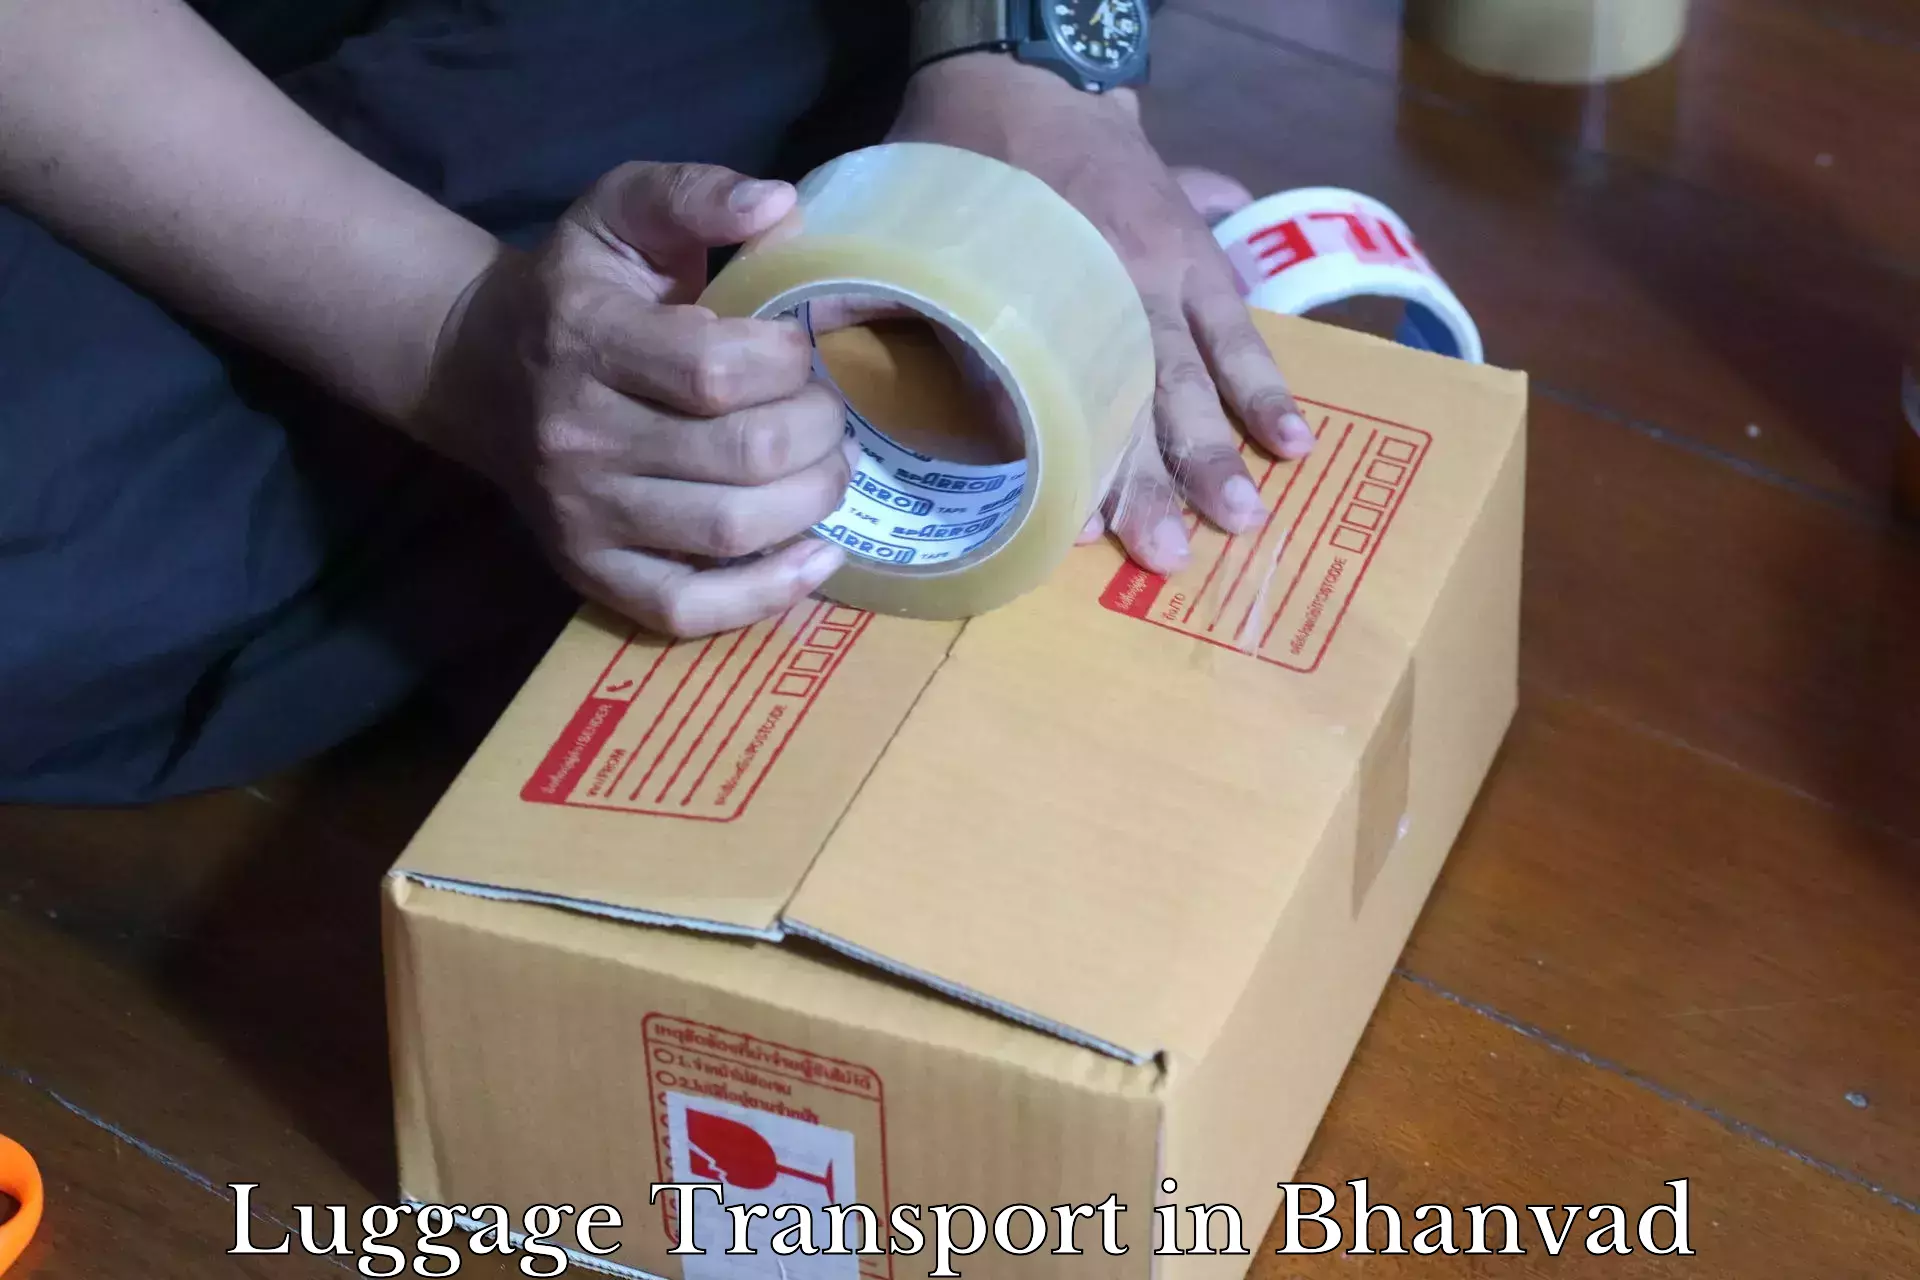 Personal effects shipping in Bhanvad